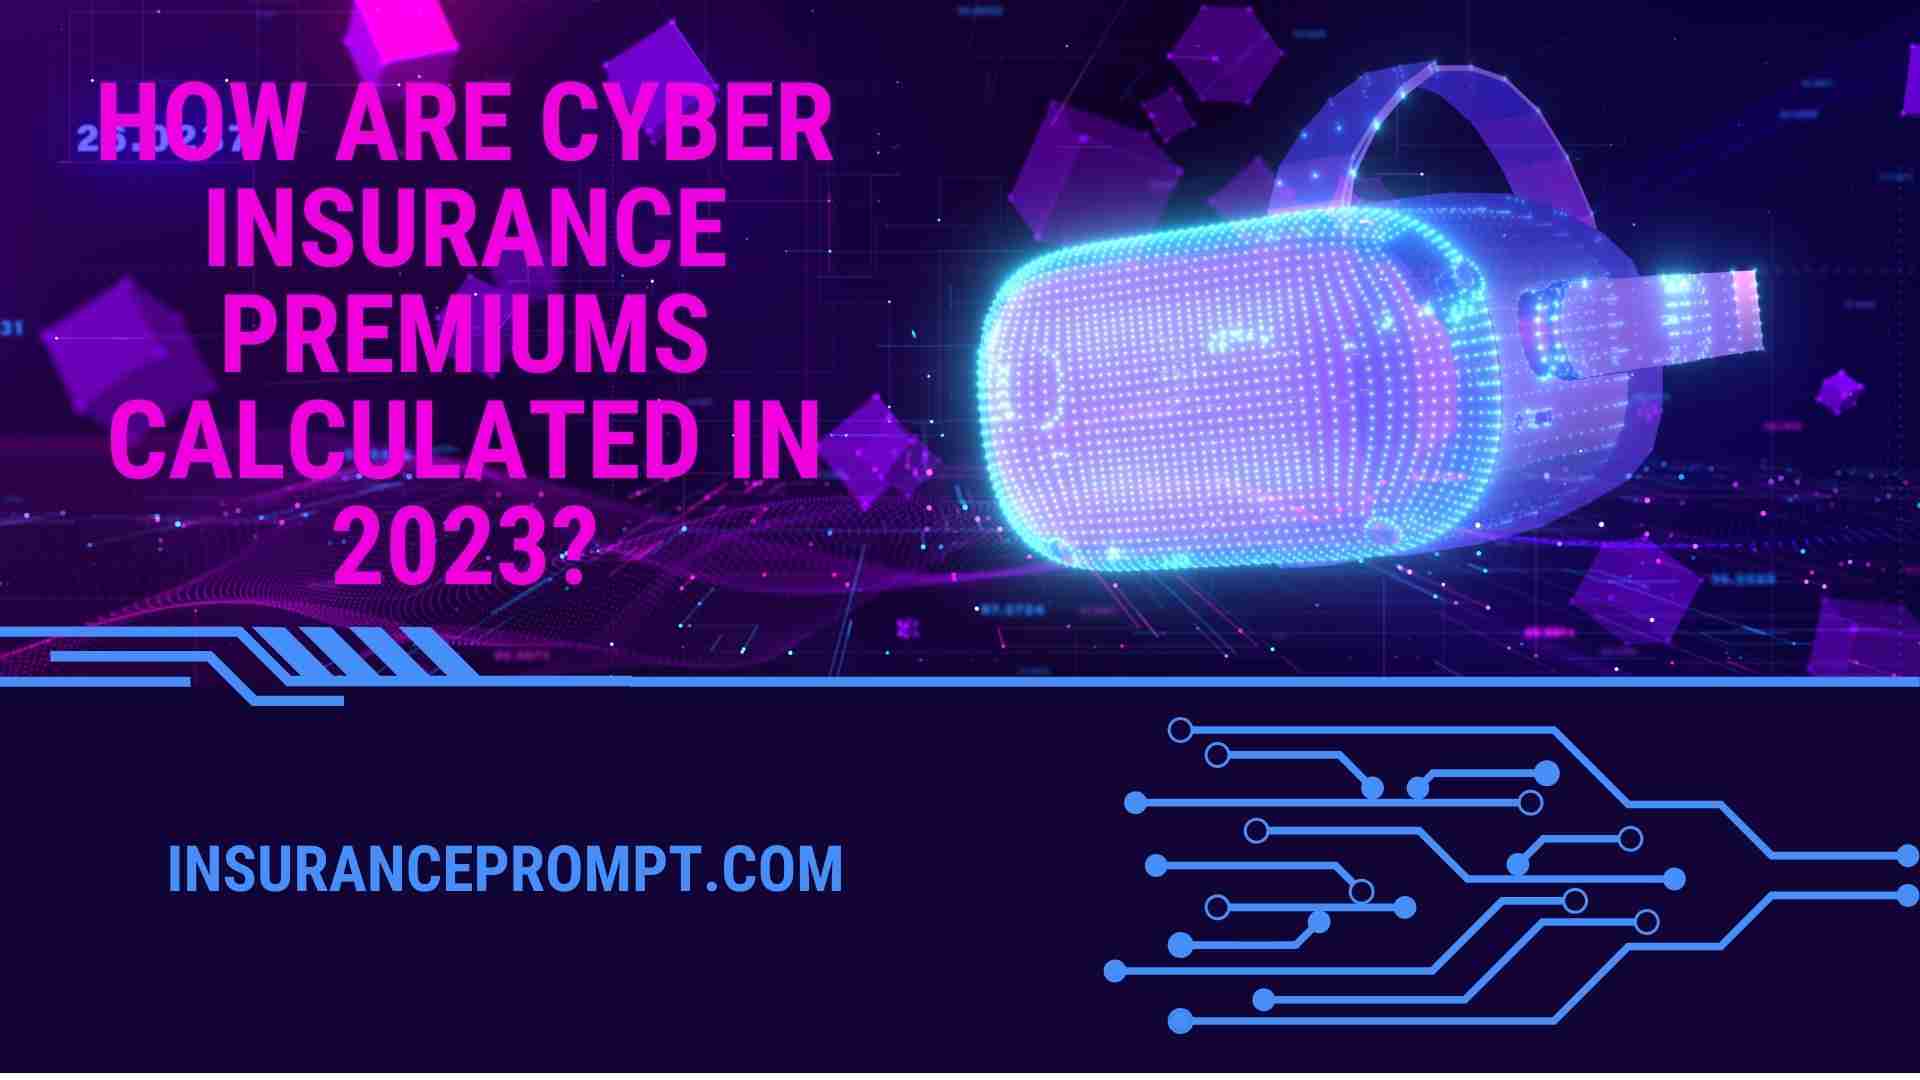 How Are Cyber Insurance Premiums Calculated In 2023?